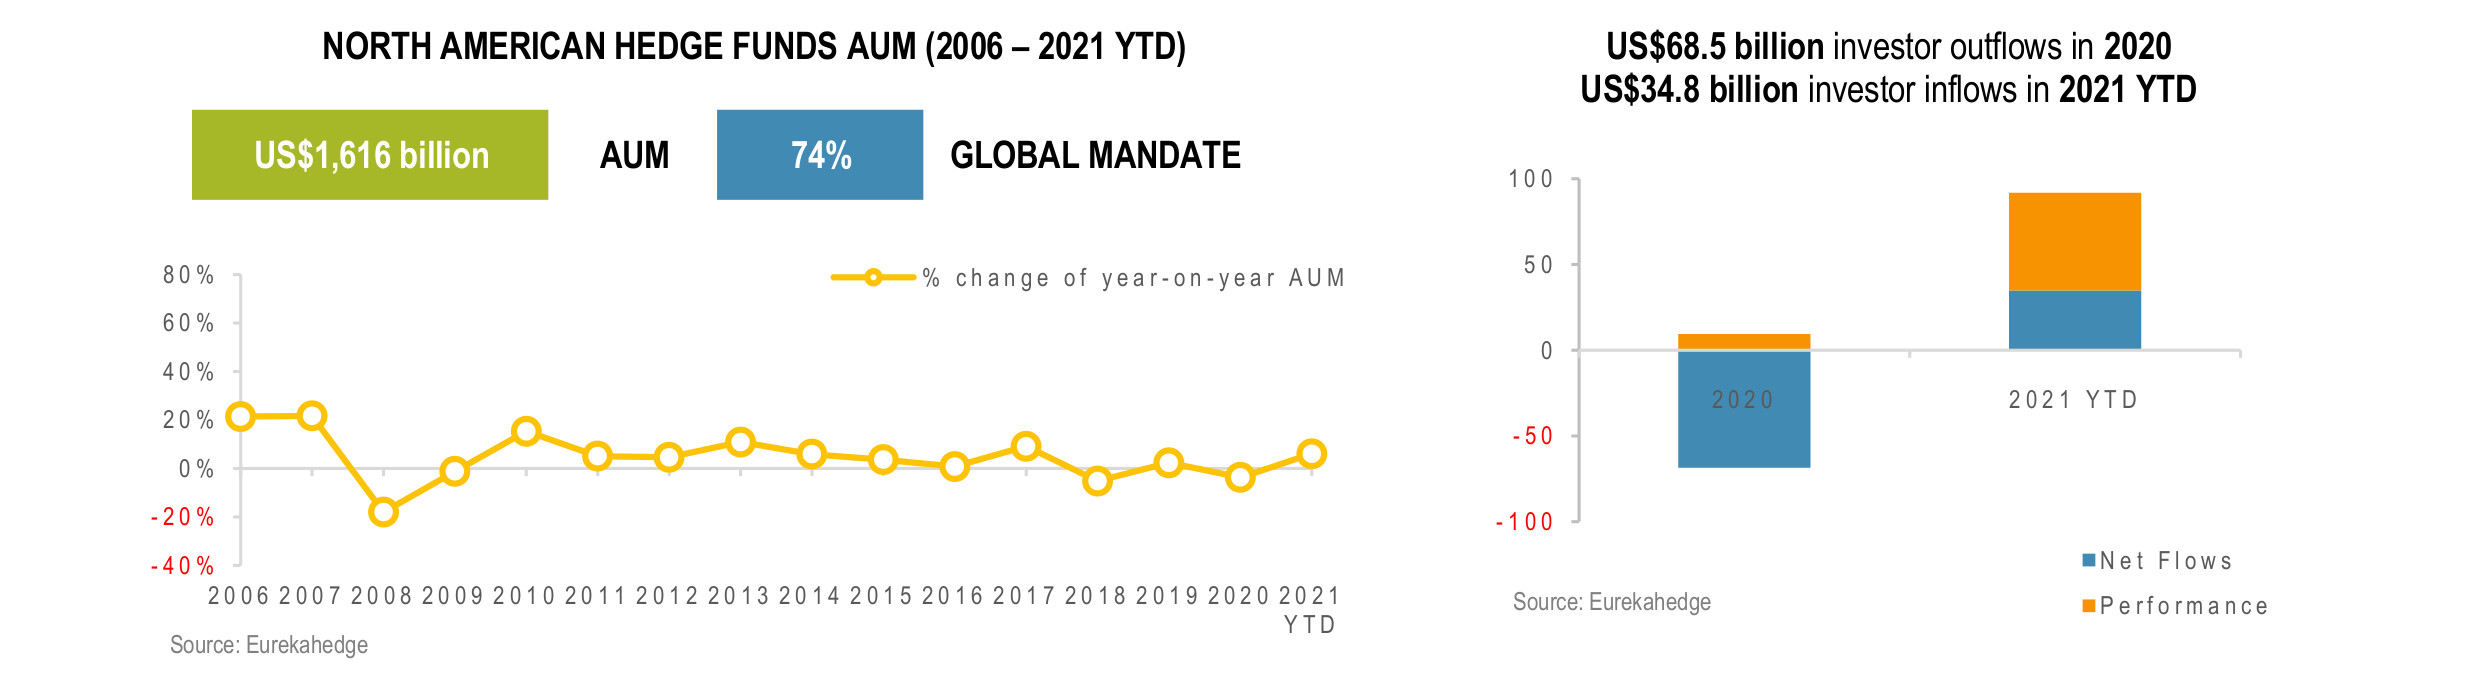 North American Hedge Funds Infographic Aug 2021 - AUM